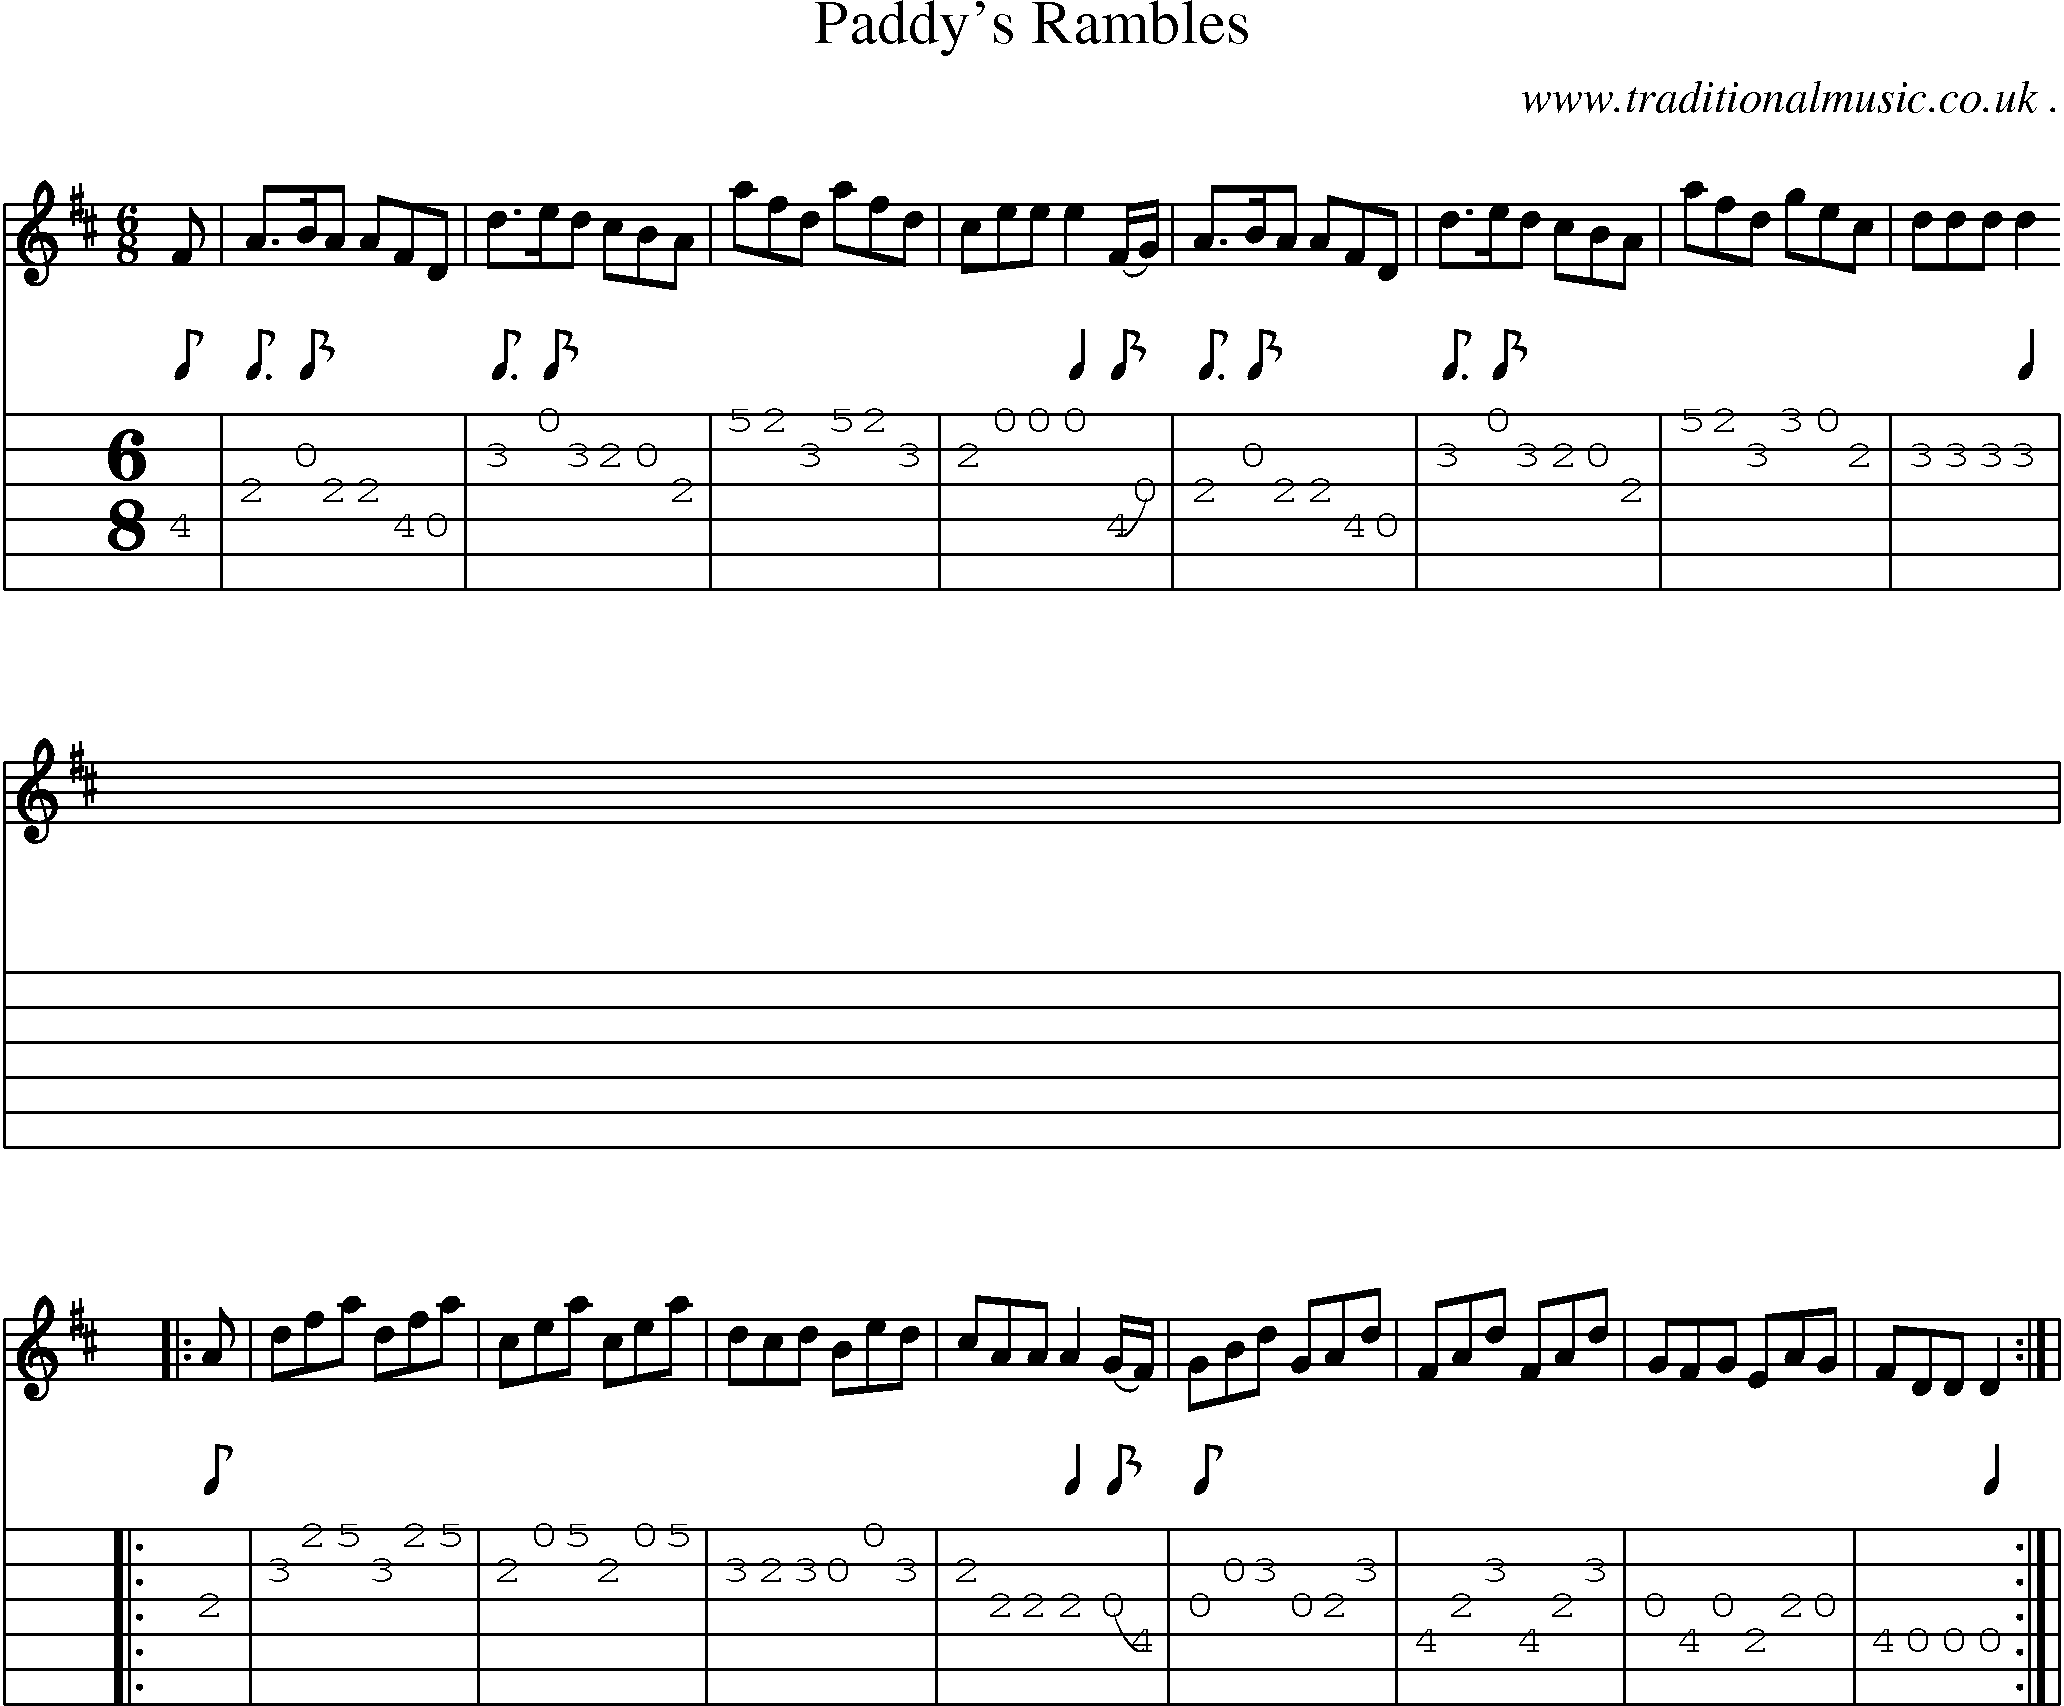 Sheet-Music and Guitar Tabs for Paddys Rambles